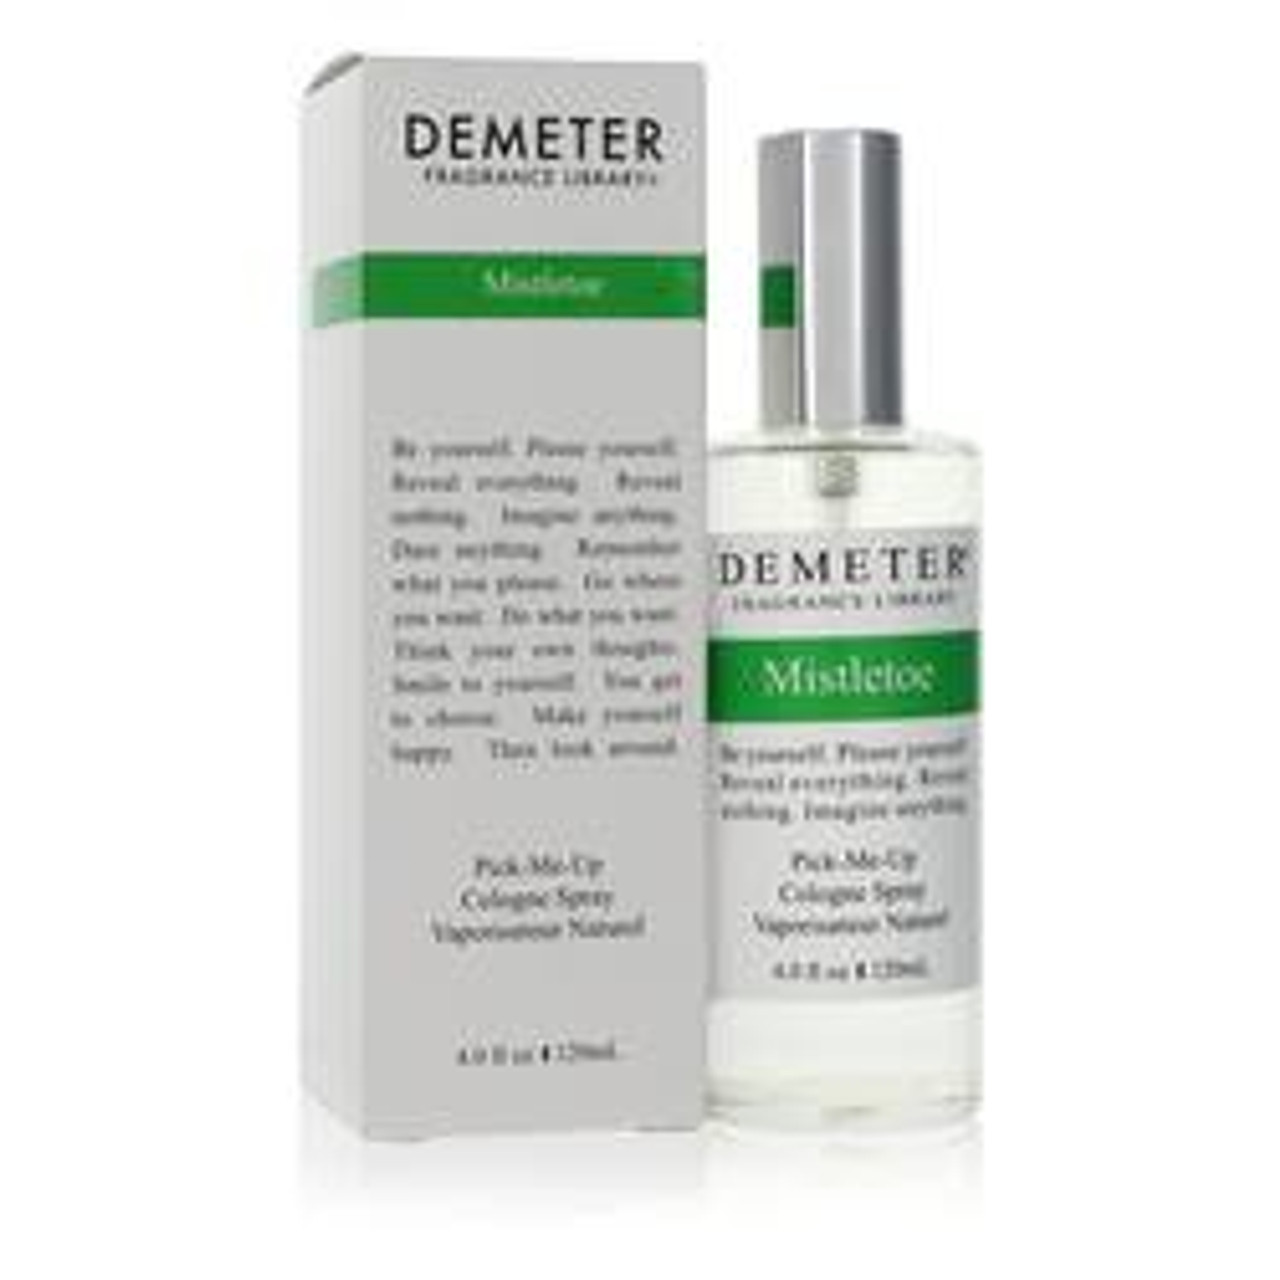 Demeter Mistletoe Cologne By Demeter Cologne Spray (Unisex) 4 oz for Men - [From 79.50 - Choose pk Qty ] - *Ships from Miami